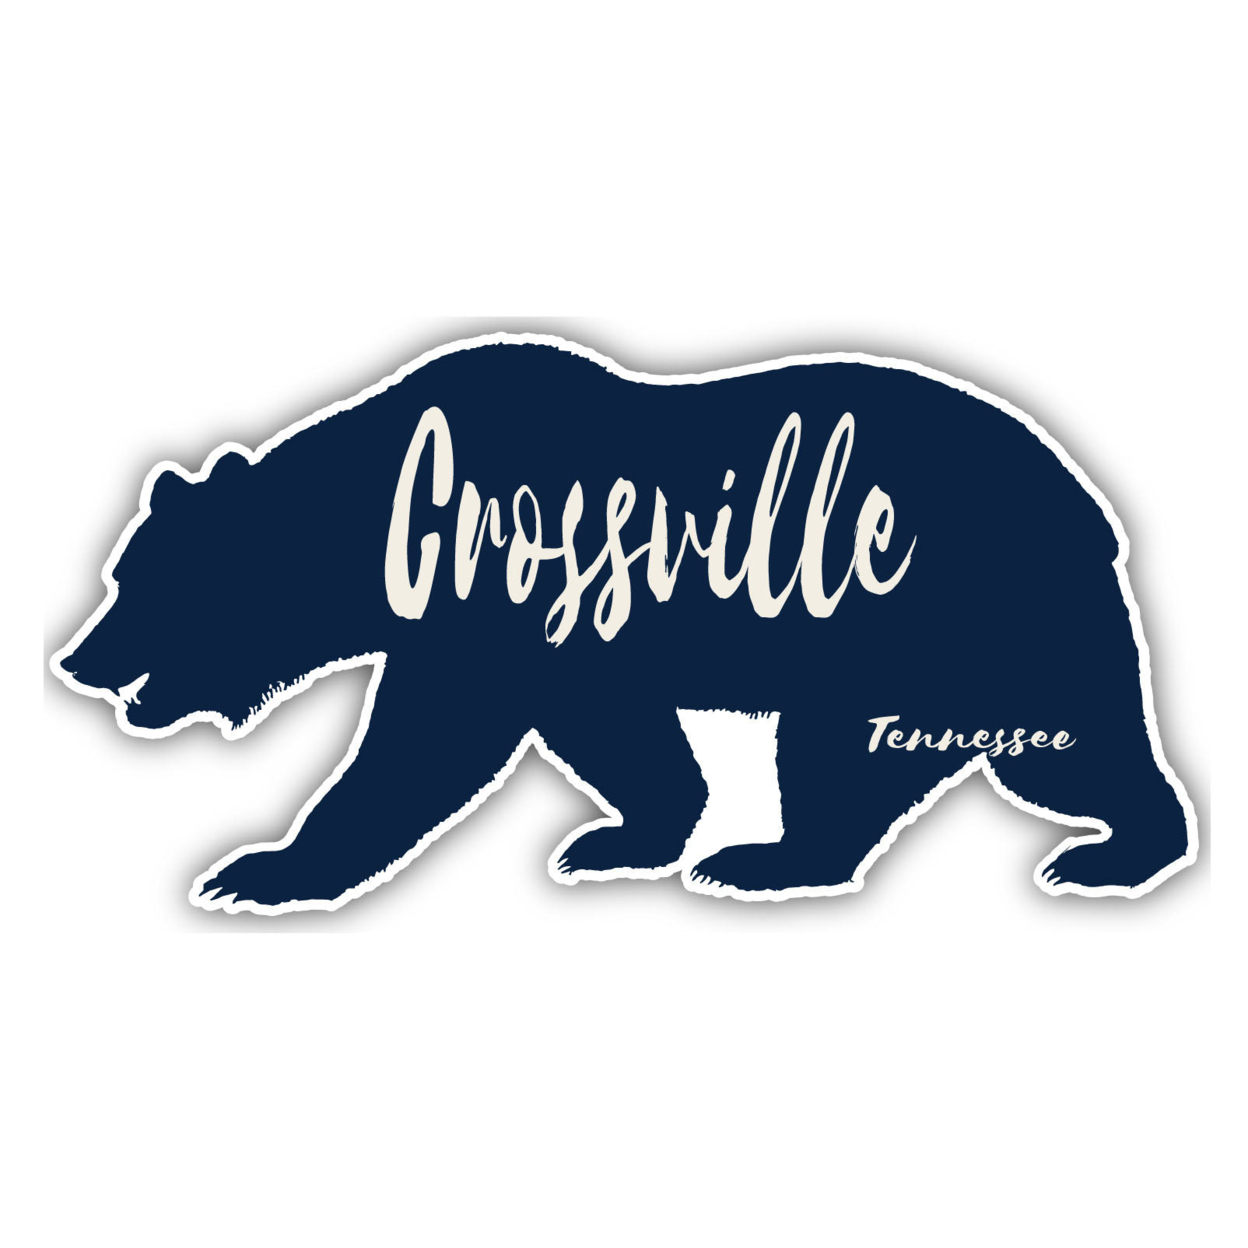 Crossville Tennessee Souvenir Decorative Stickers (Choose Theme And Size) - 4-Pack, 6-Inch, Bear